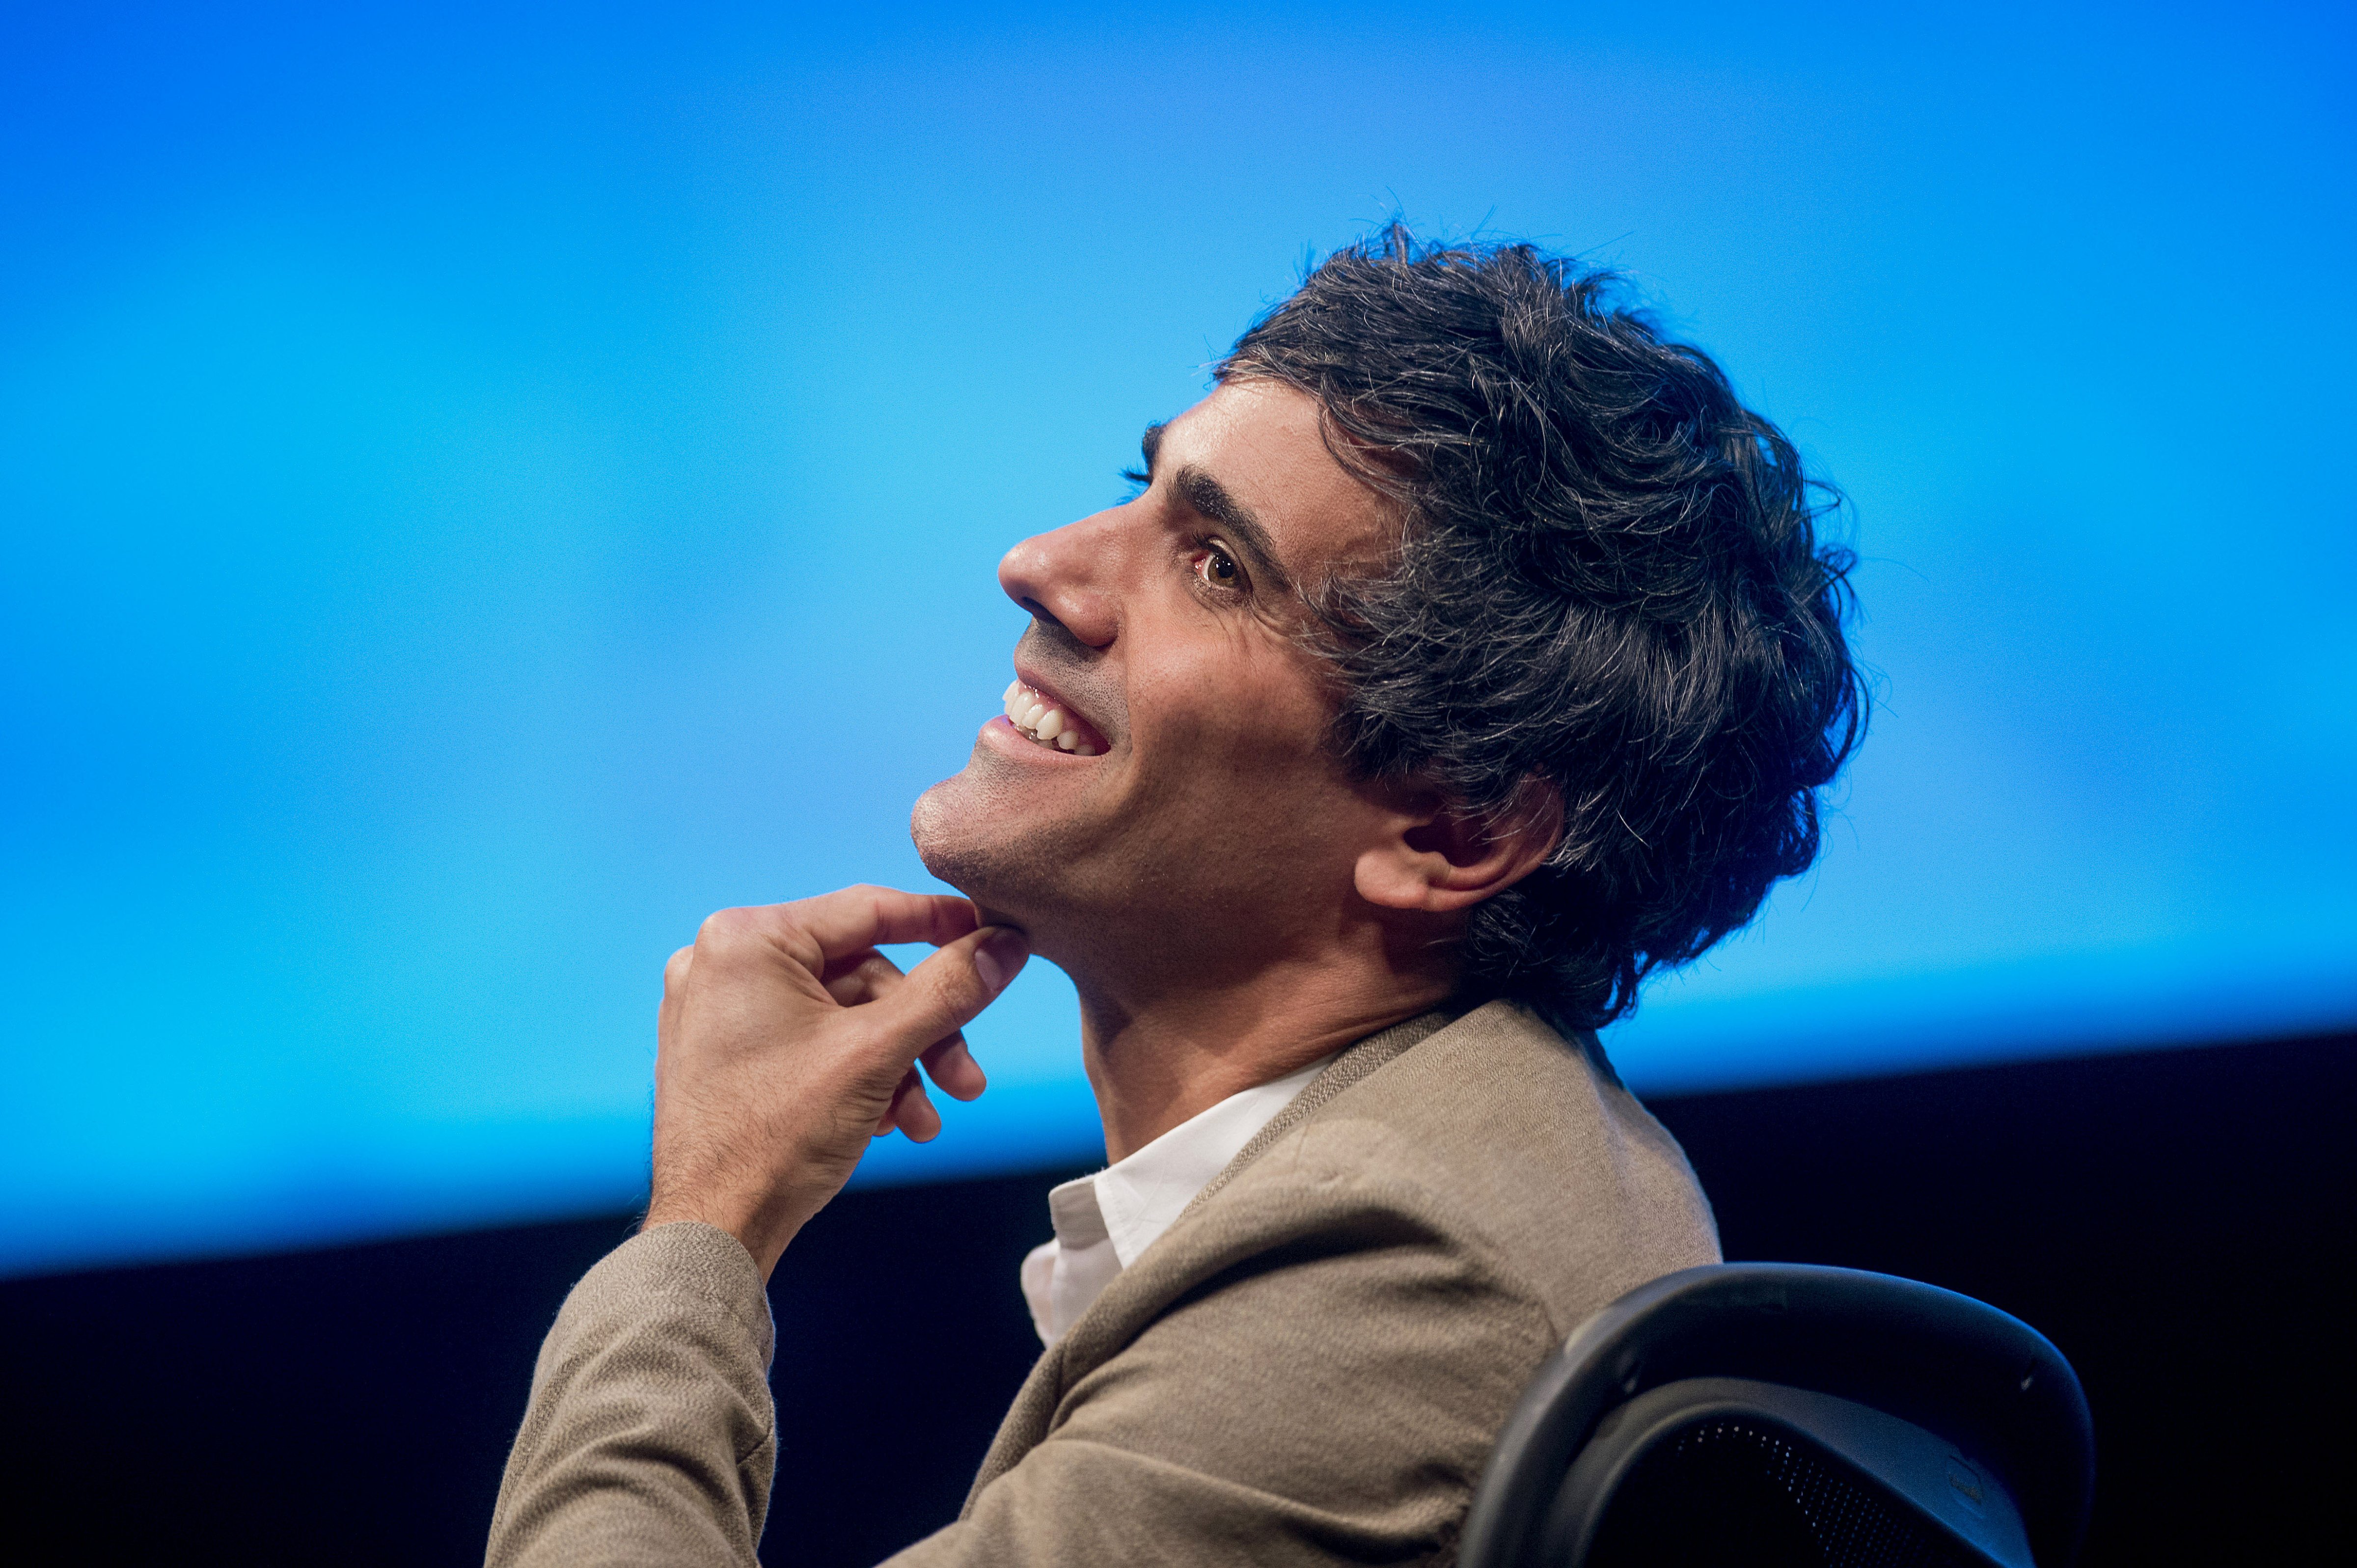 Jeremy Stoppelman, chief executive officer and co-founder of Yelp Inc., smiles during a panel discussion at the DreamForce Conference in San Francisco, California on Oct. 13, 2014. (Bloomberg&mdash;Bloomberg via Getty Images)